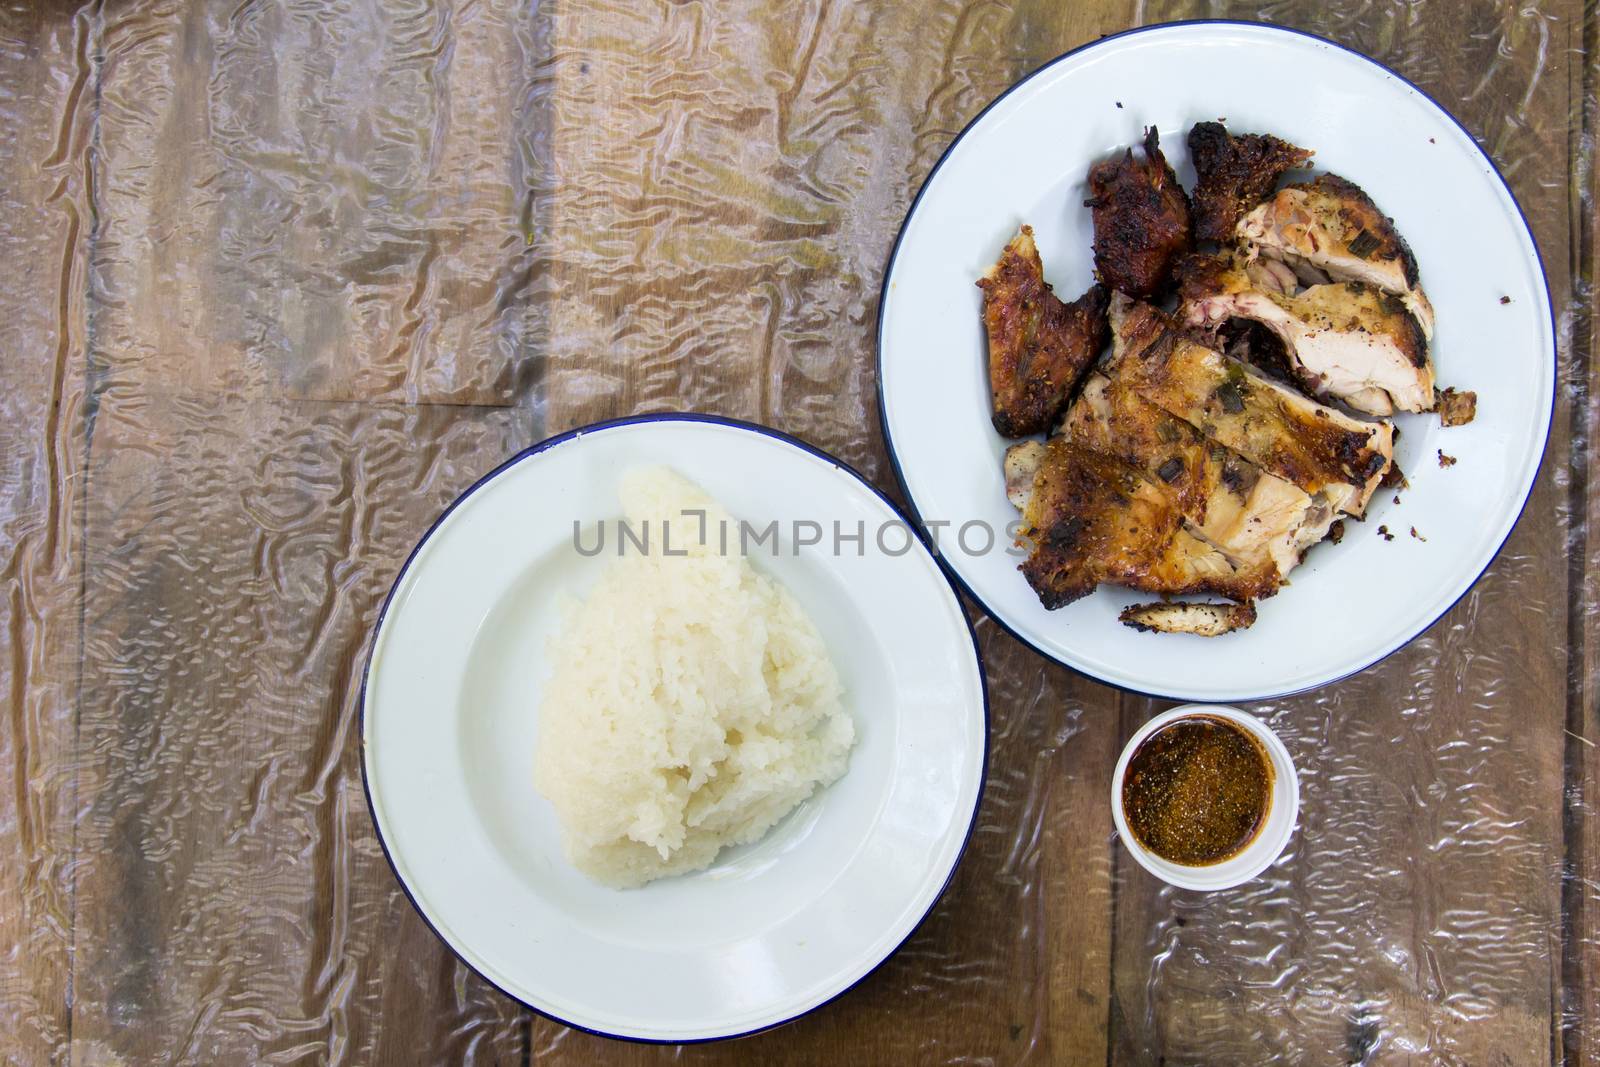 Grilled chicken and sticky rice on wooden background by Hengpattanapong